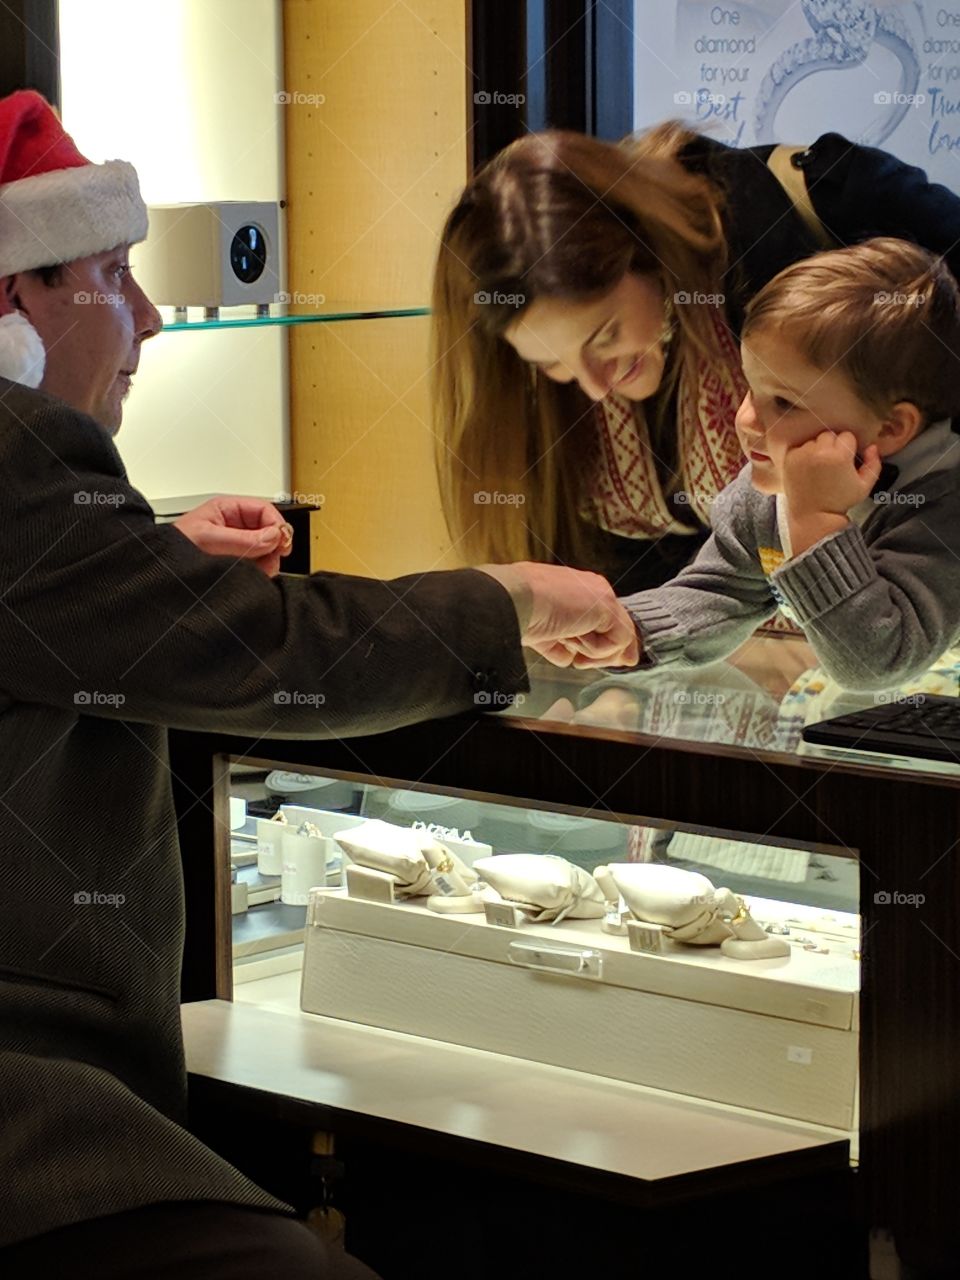 Buying mom a ring!